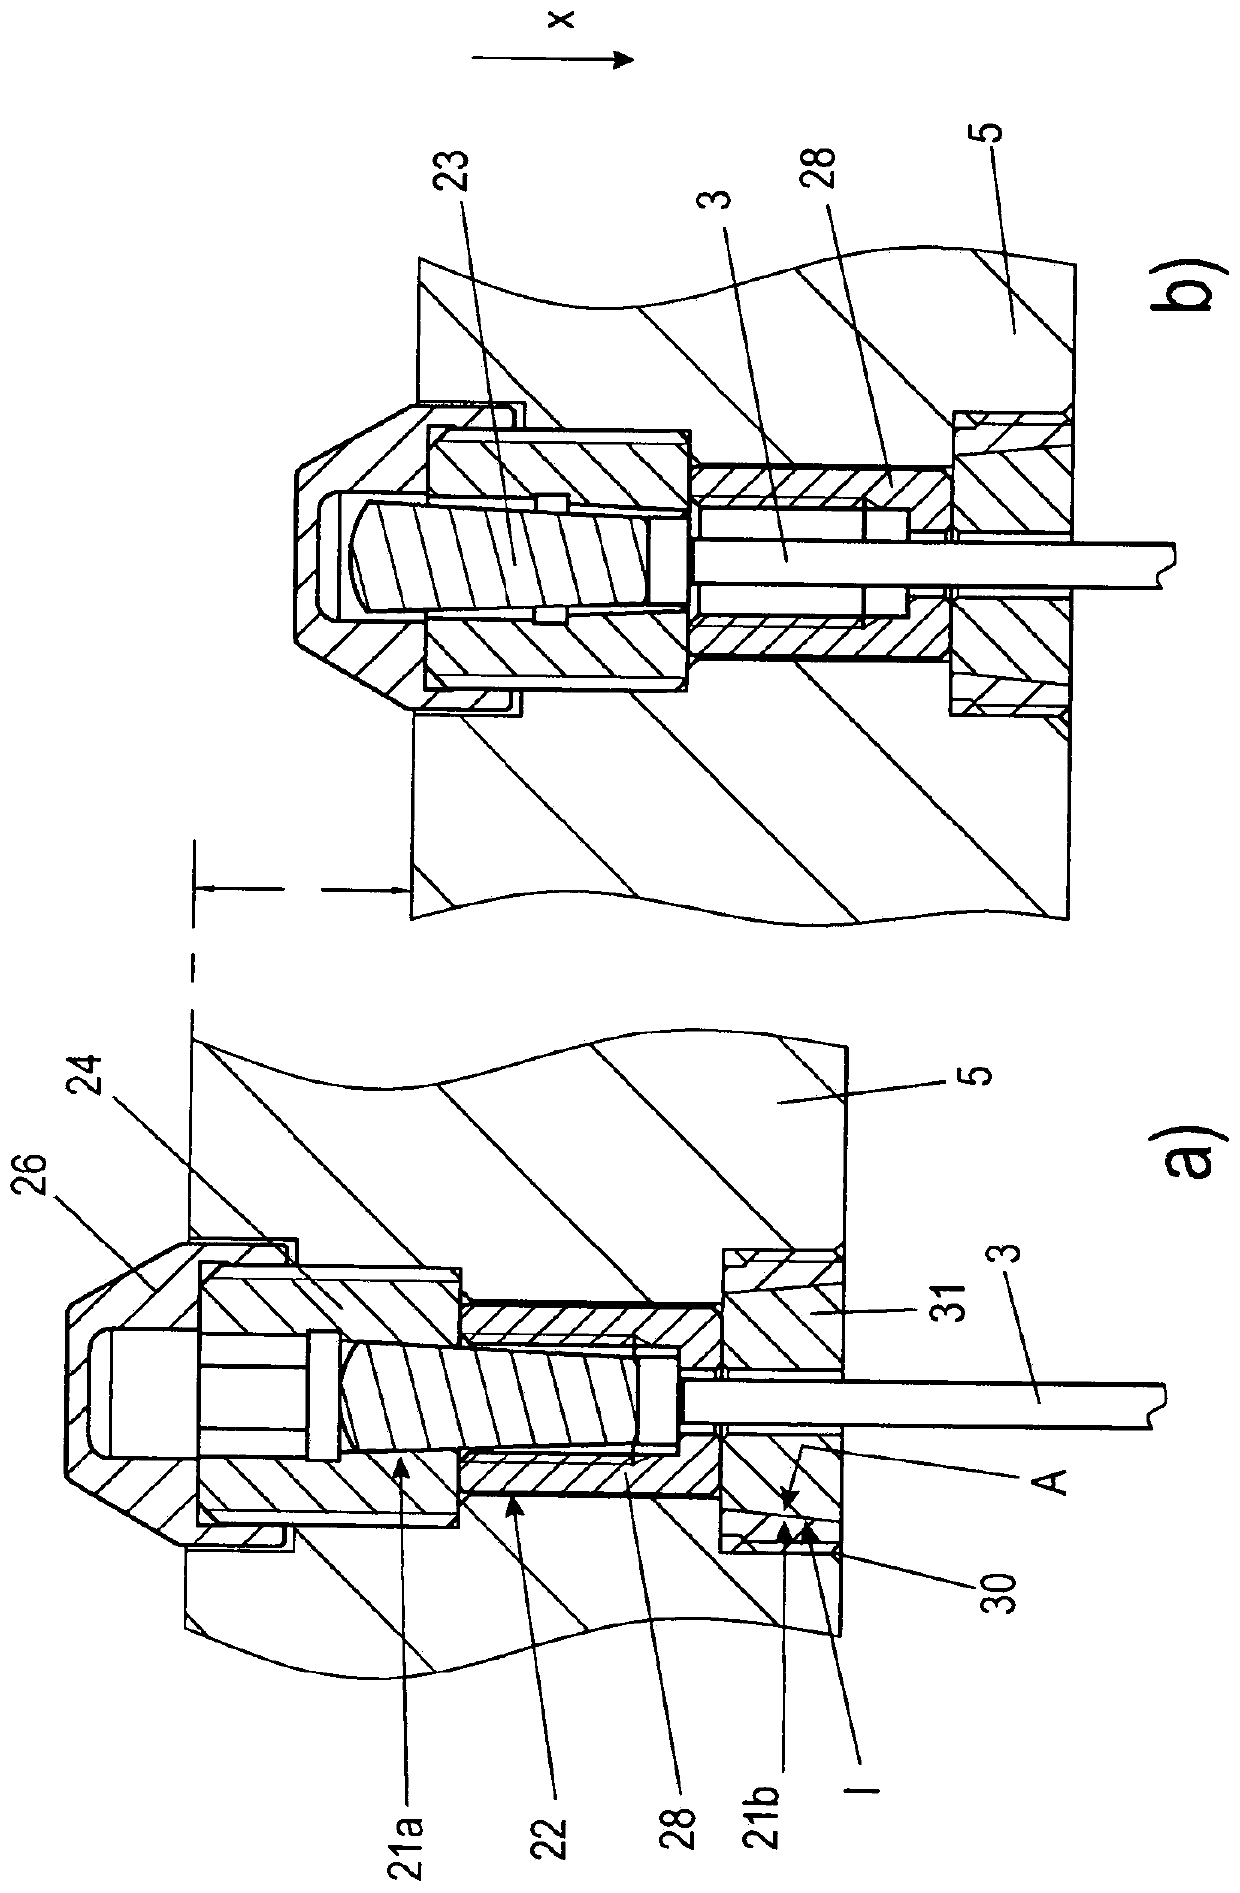 Hot runner device having an overload protection device